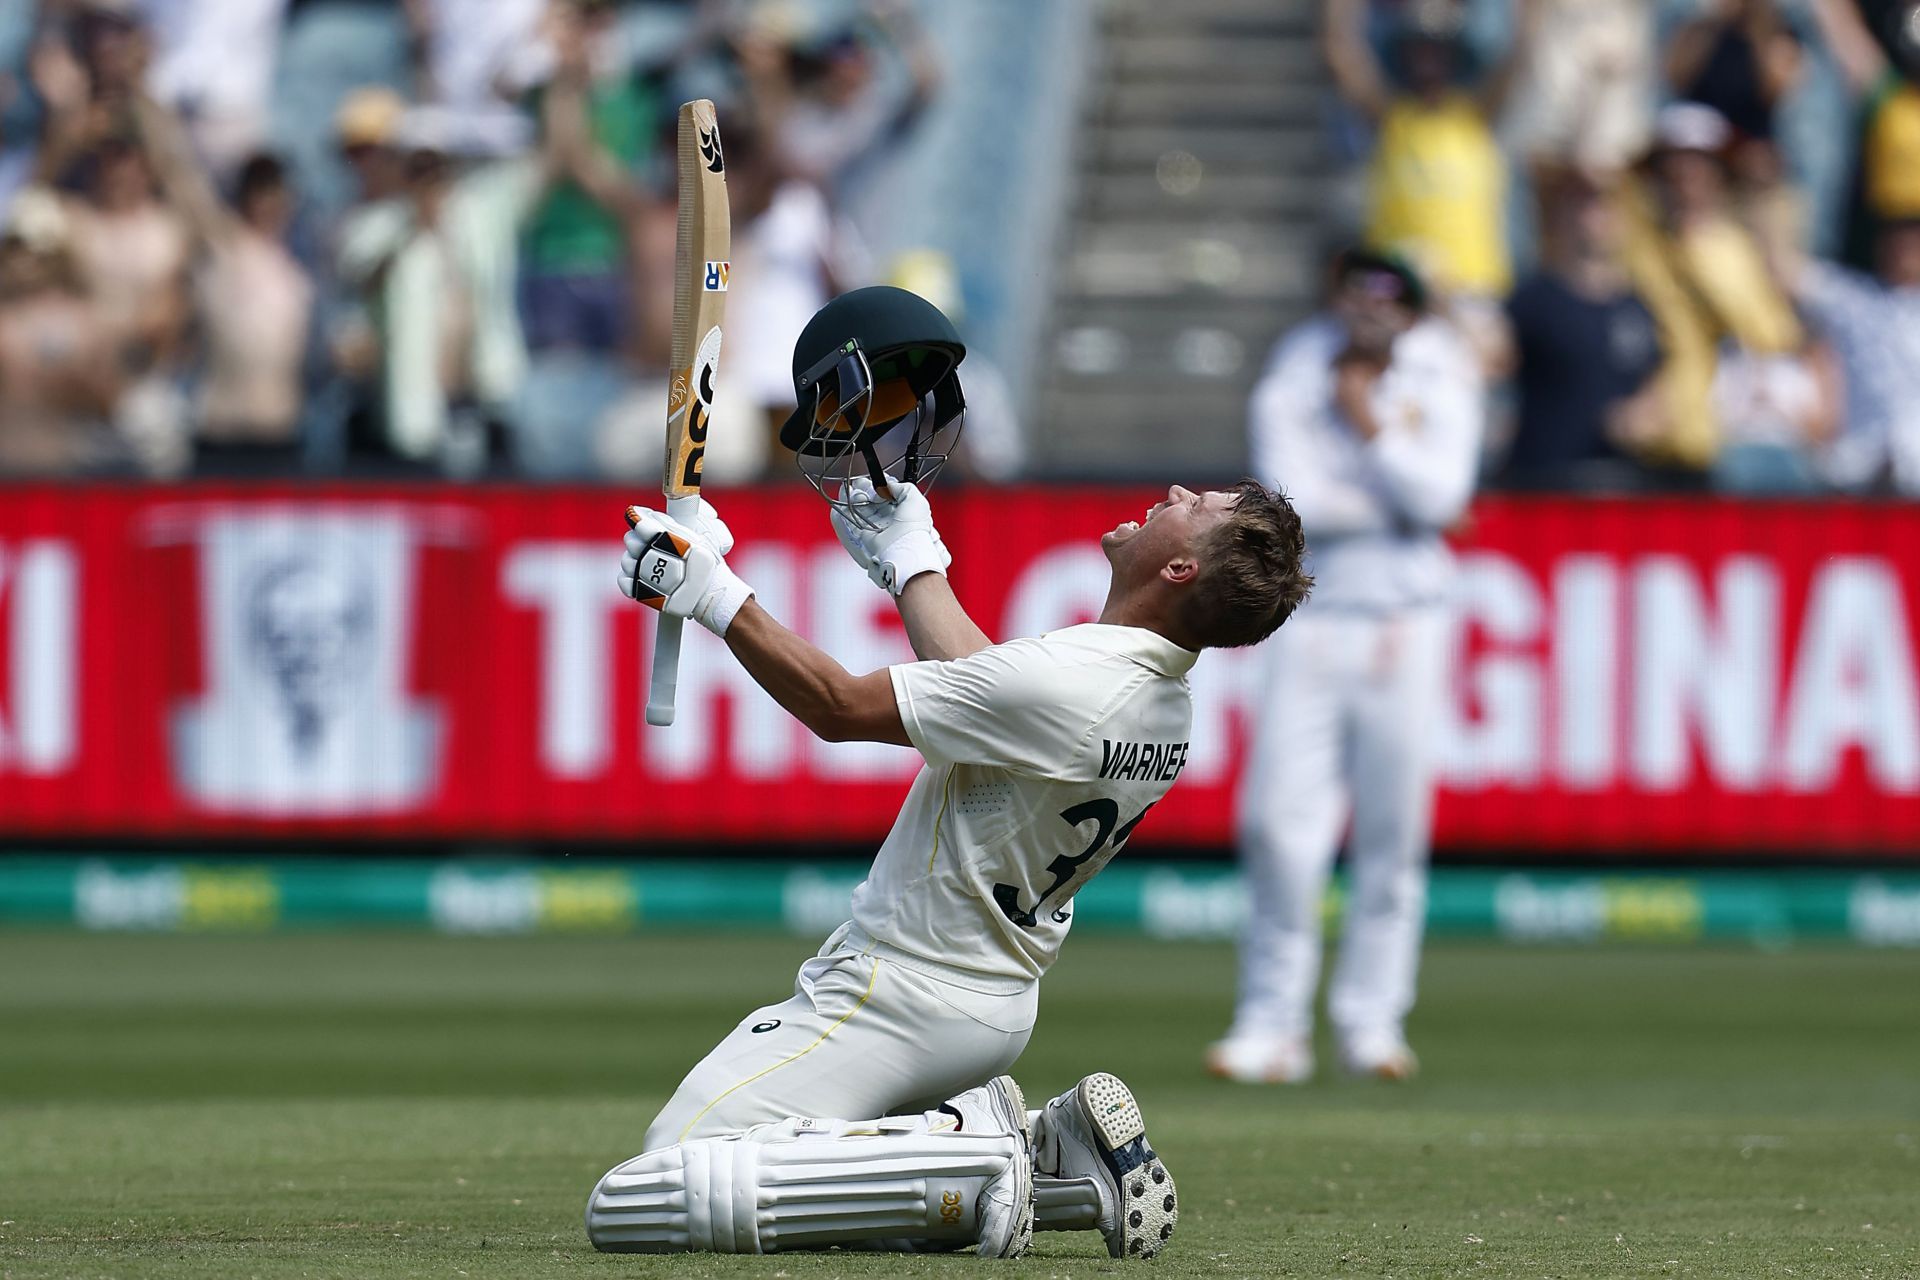 David Warner celebrates his double ton at the Melbourne Cricket Ground (MCG). Pic: Getty Images